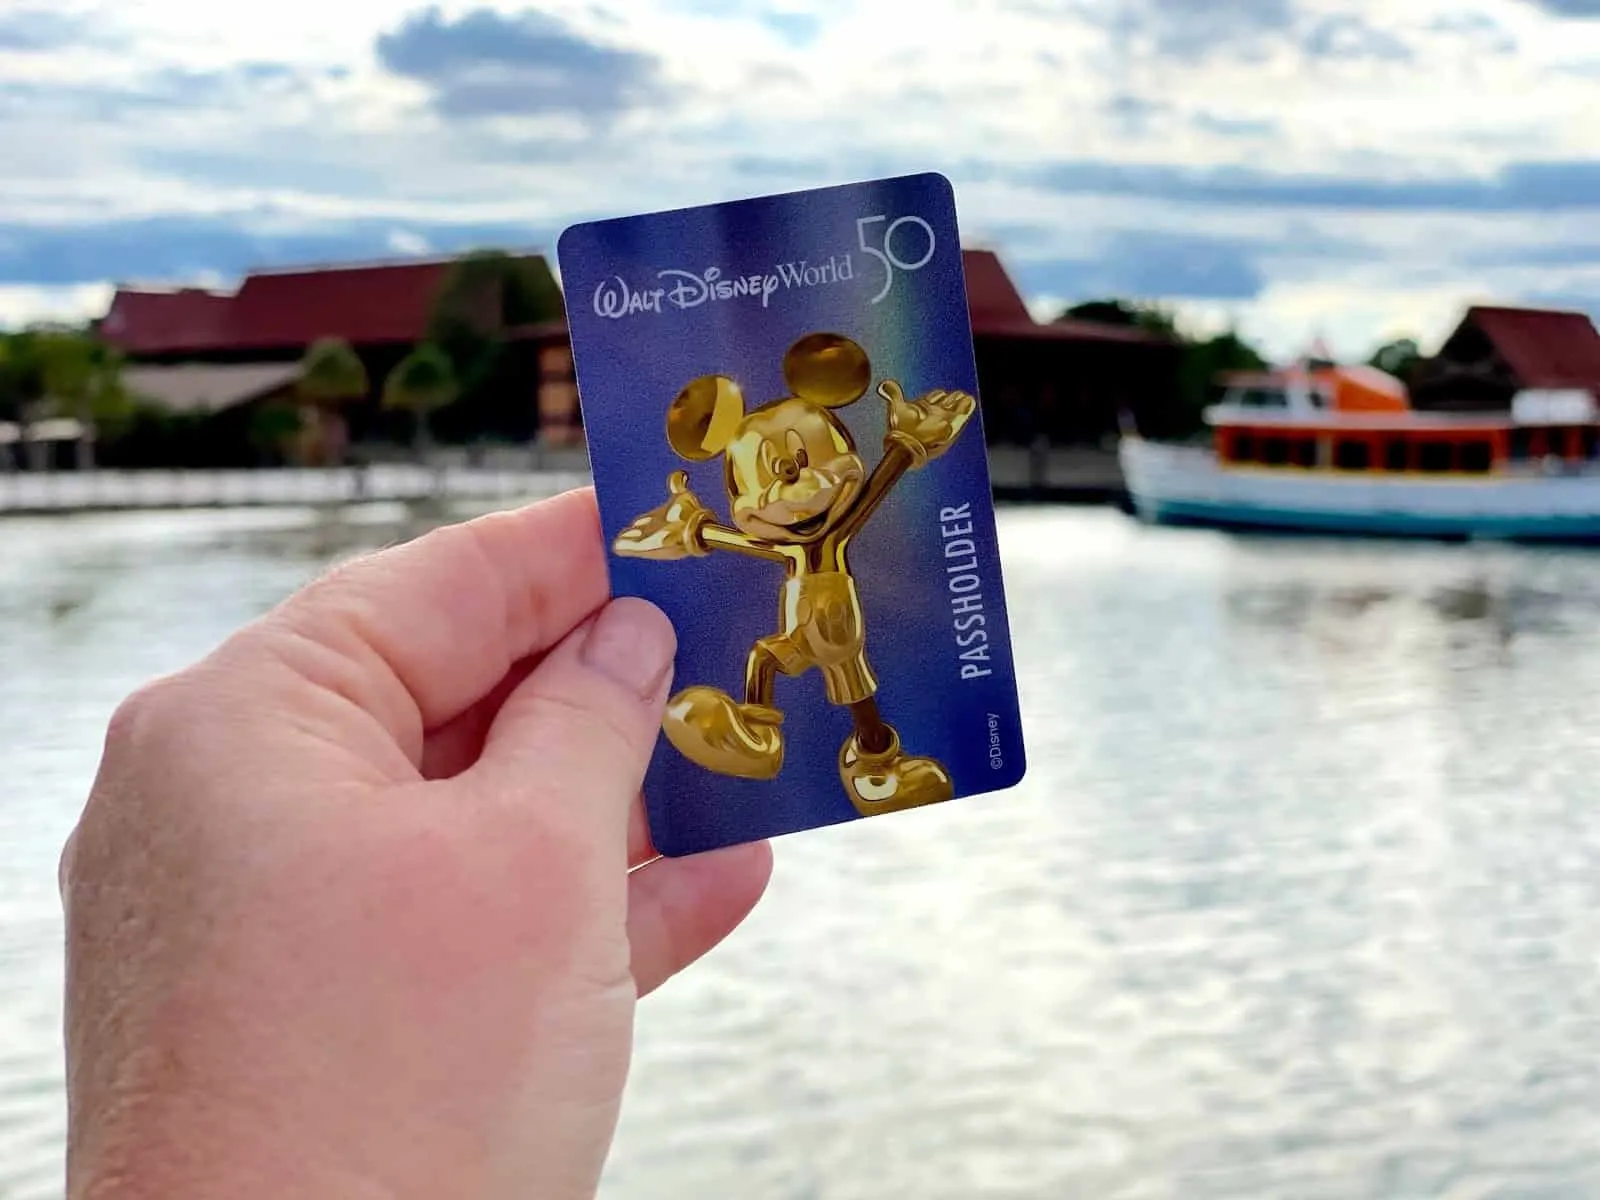 New Sales Of Select Walt Disney World Annual Passes Currently Paused